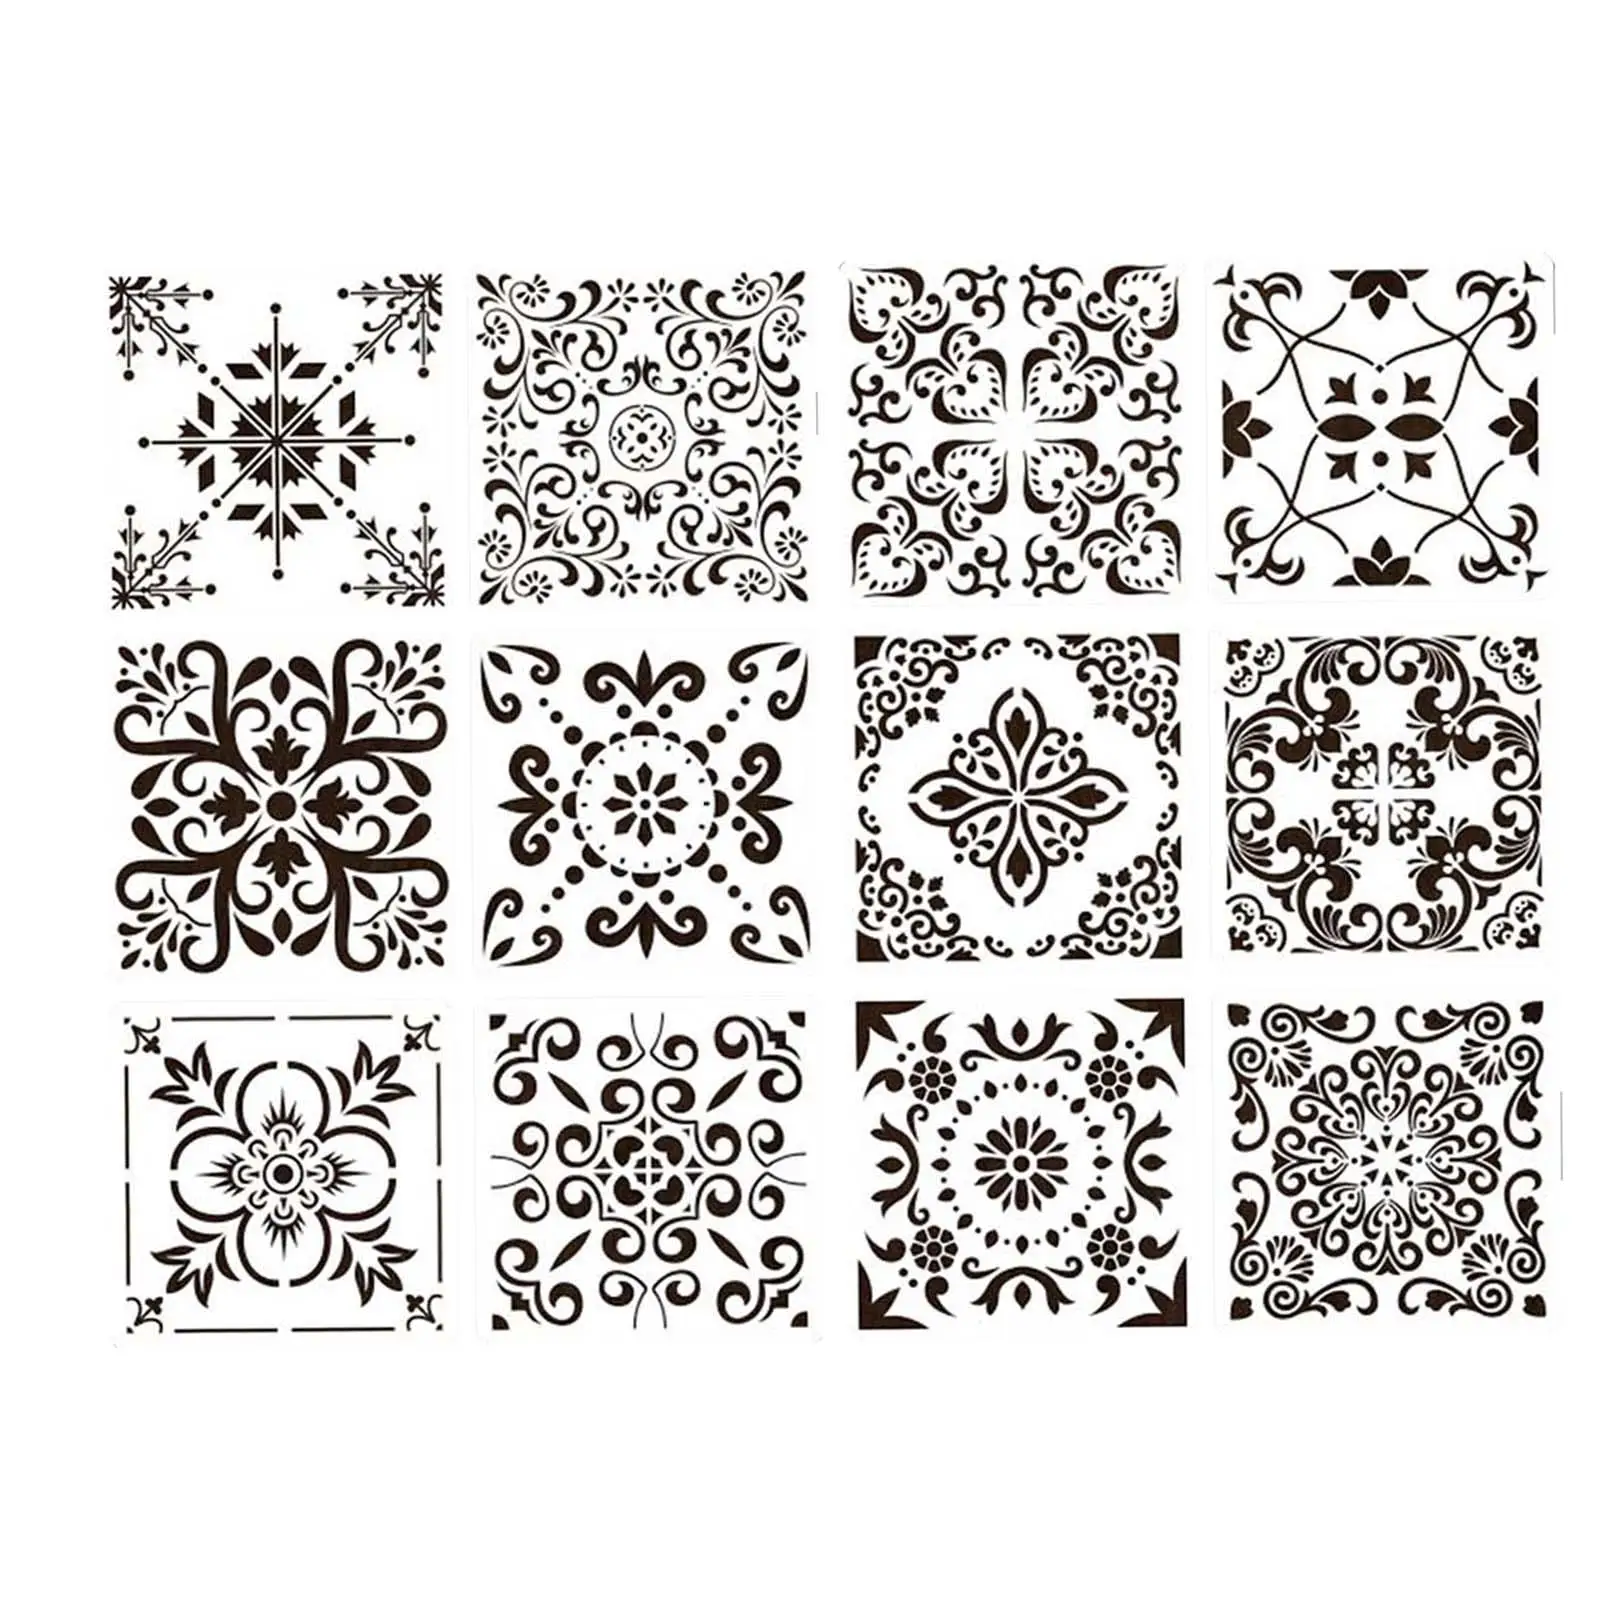 12x Mandala Stencil Template Reused DIY Craft Painting Tool Drawing Templates for Metal Fabric Outdoor Indoor